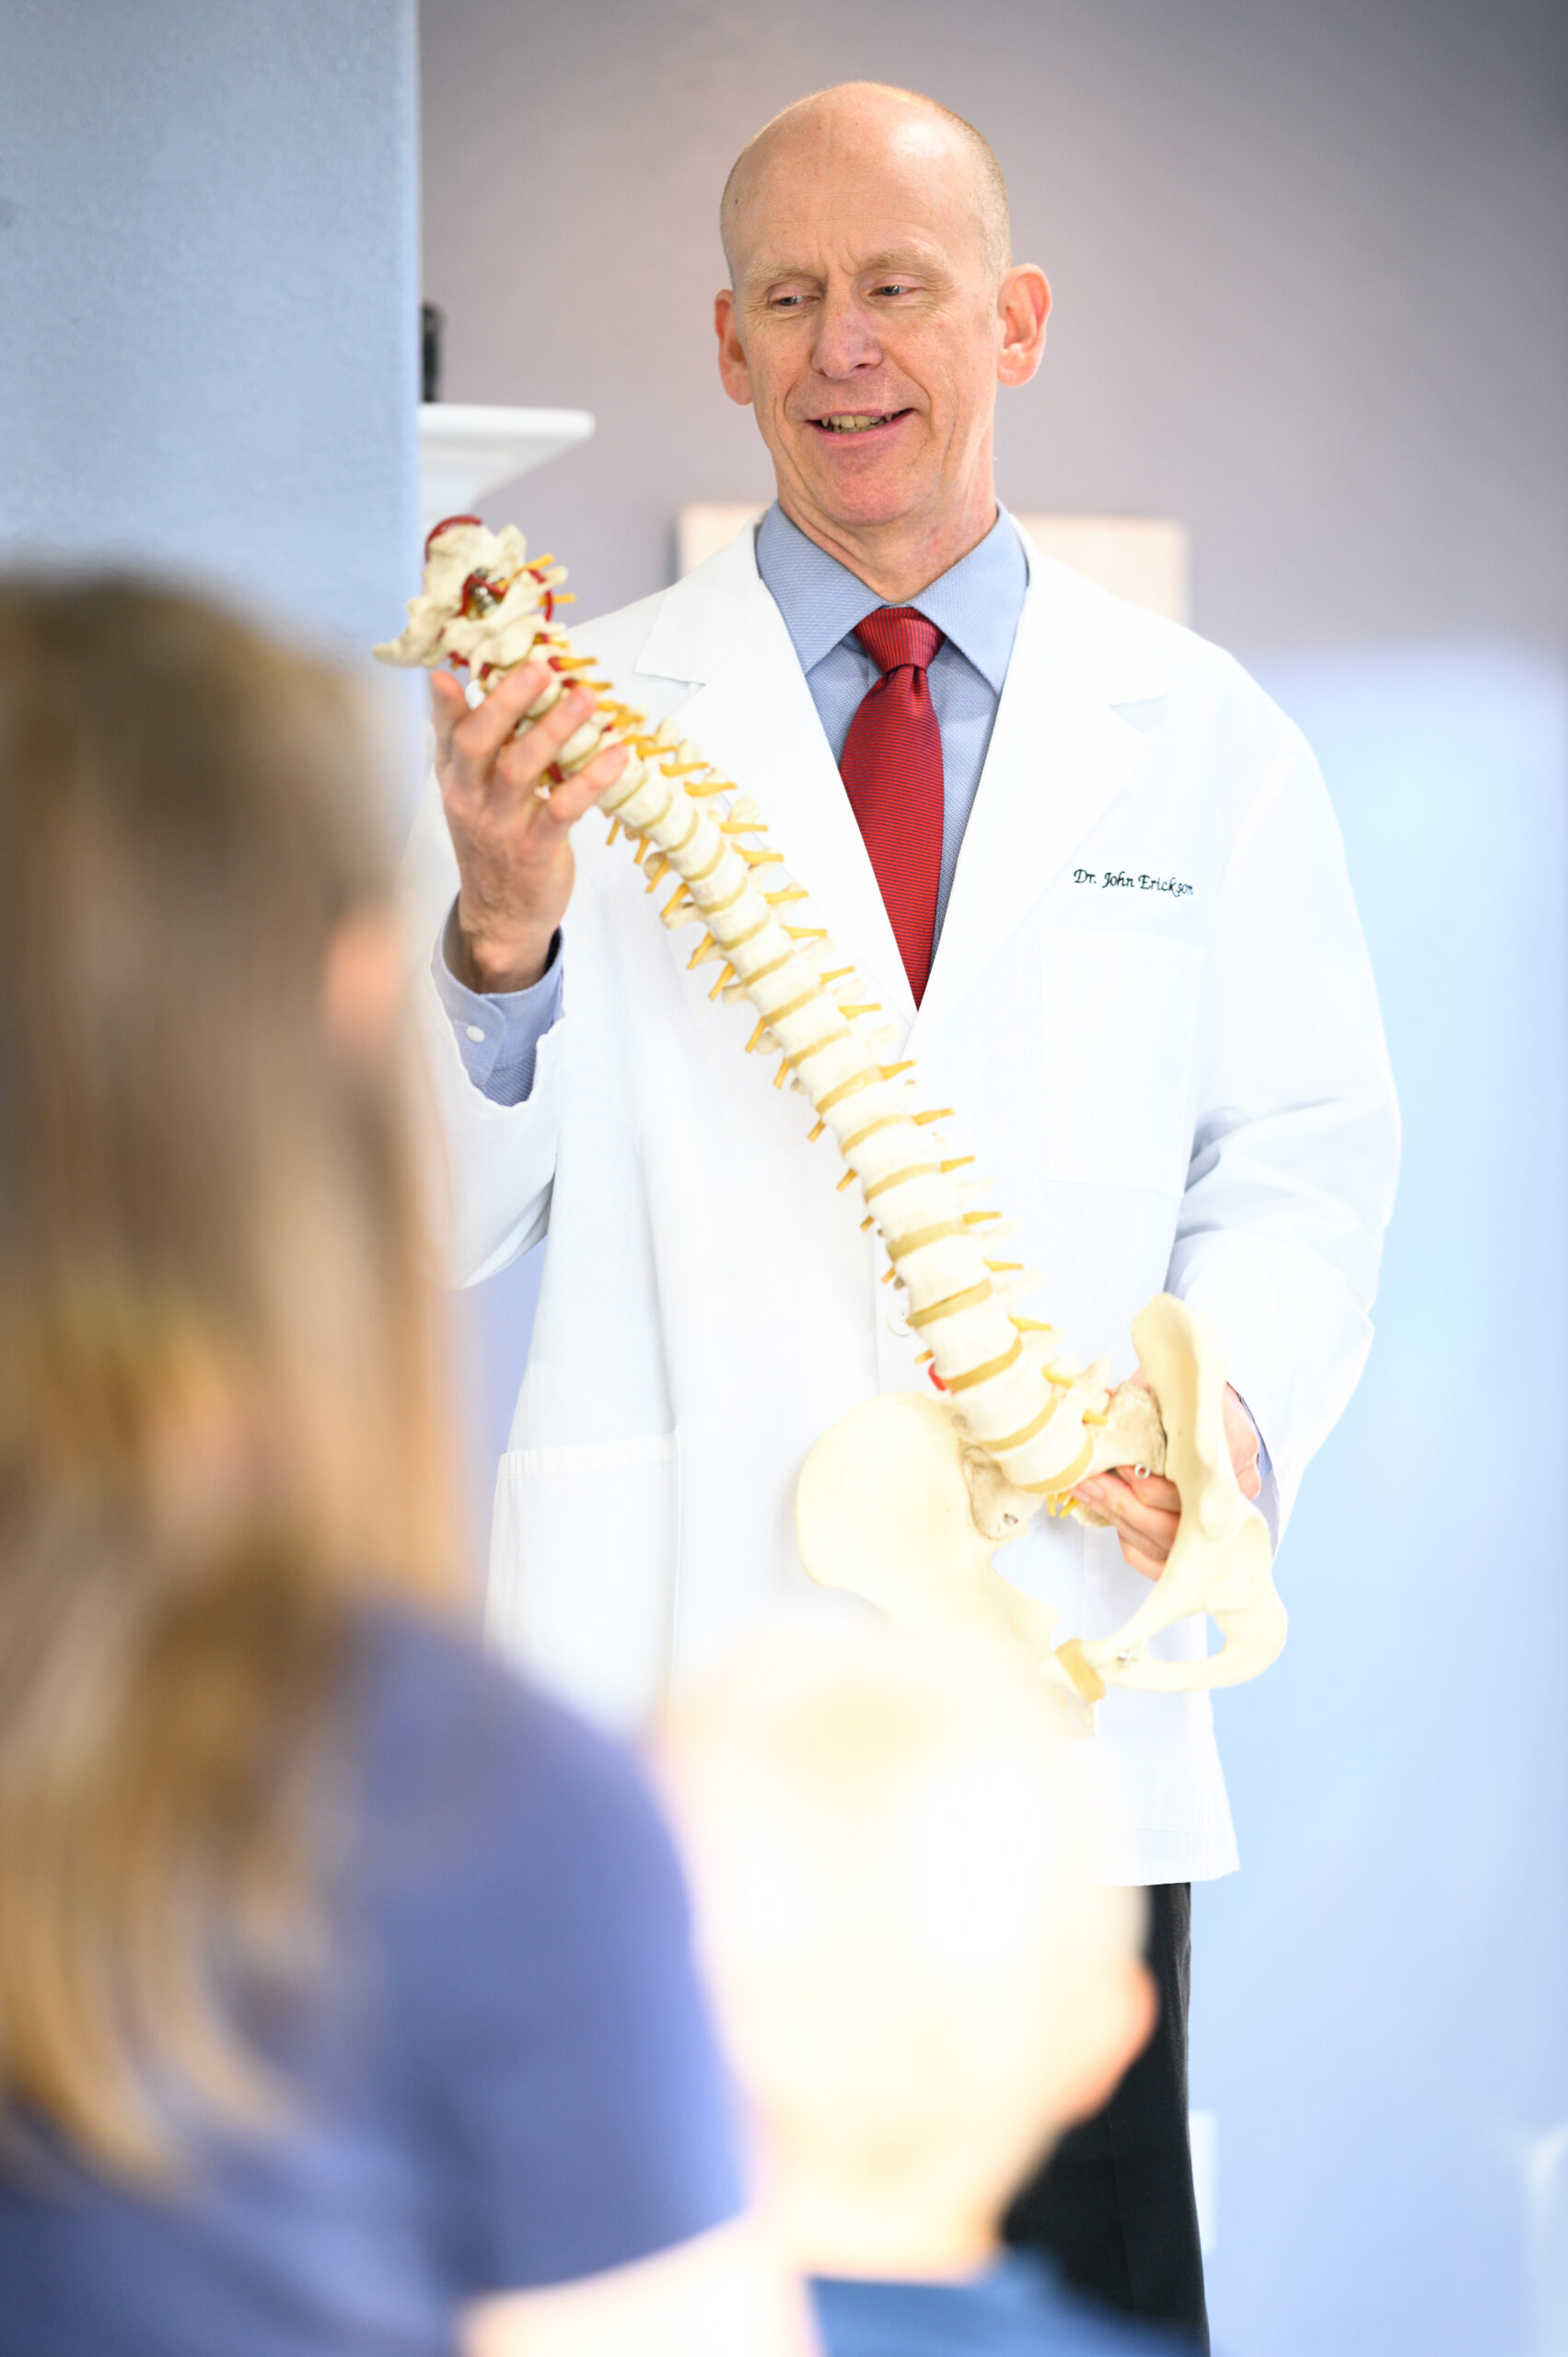 Top Rated Chiropractor Serving Loveland and Fort Collins